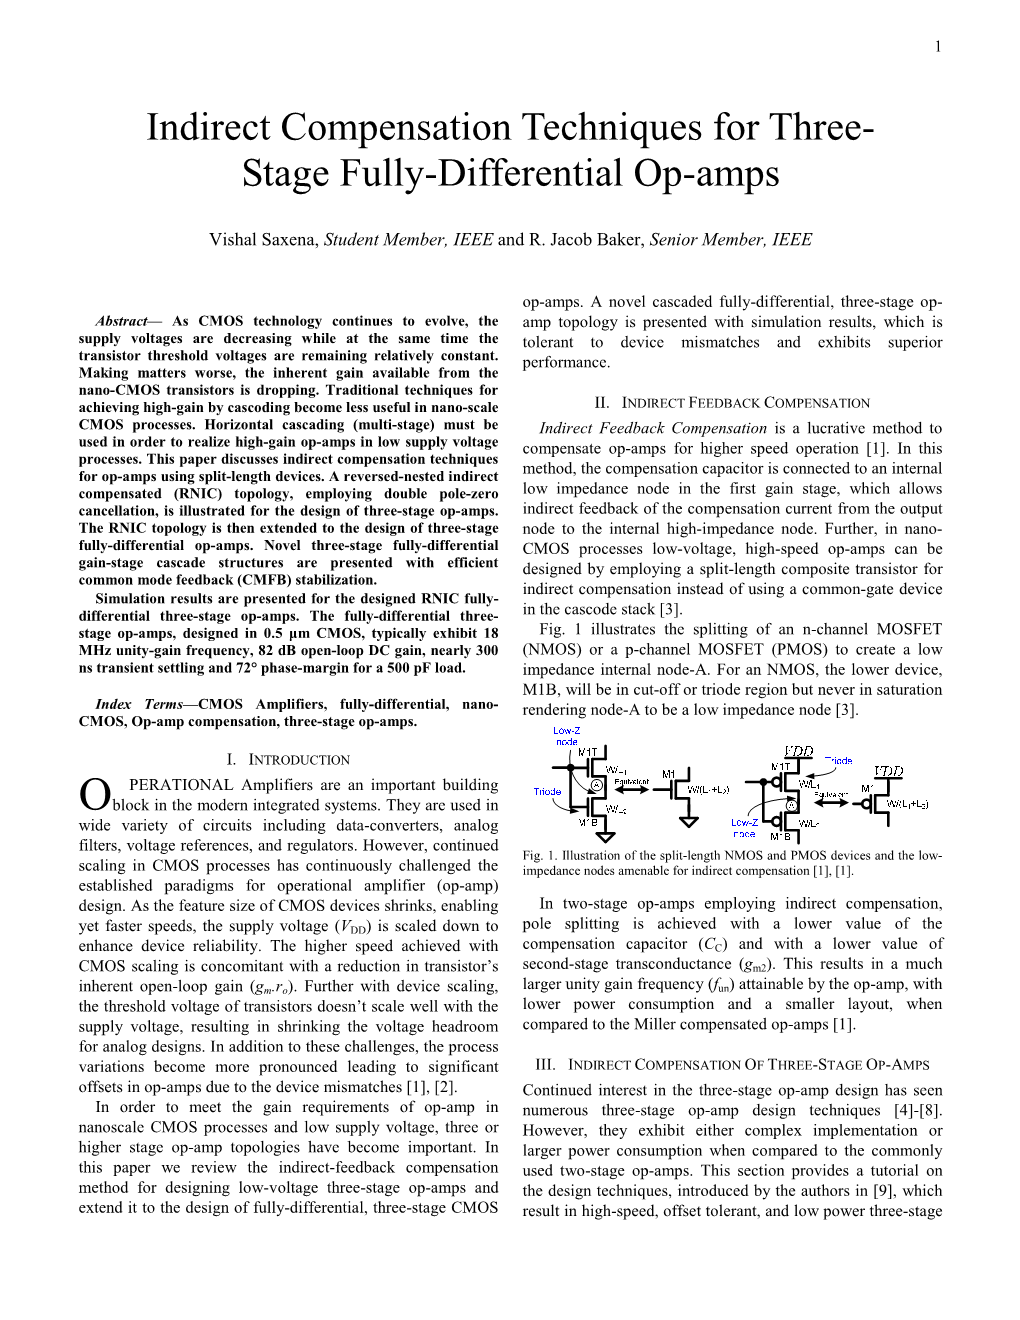 Indirect Compensation Techniques for Three- Stage Fully-Differential Op-Amps